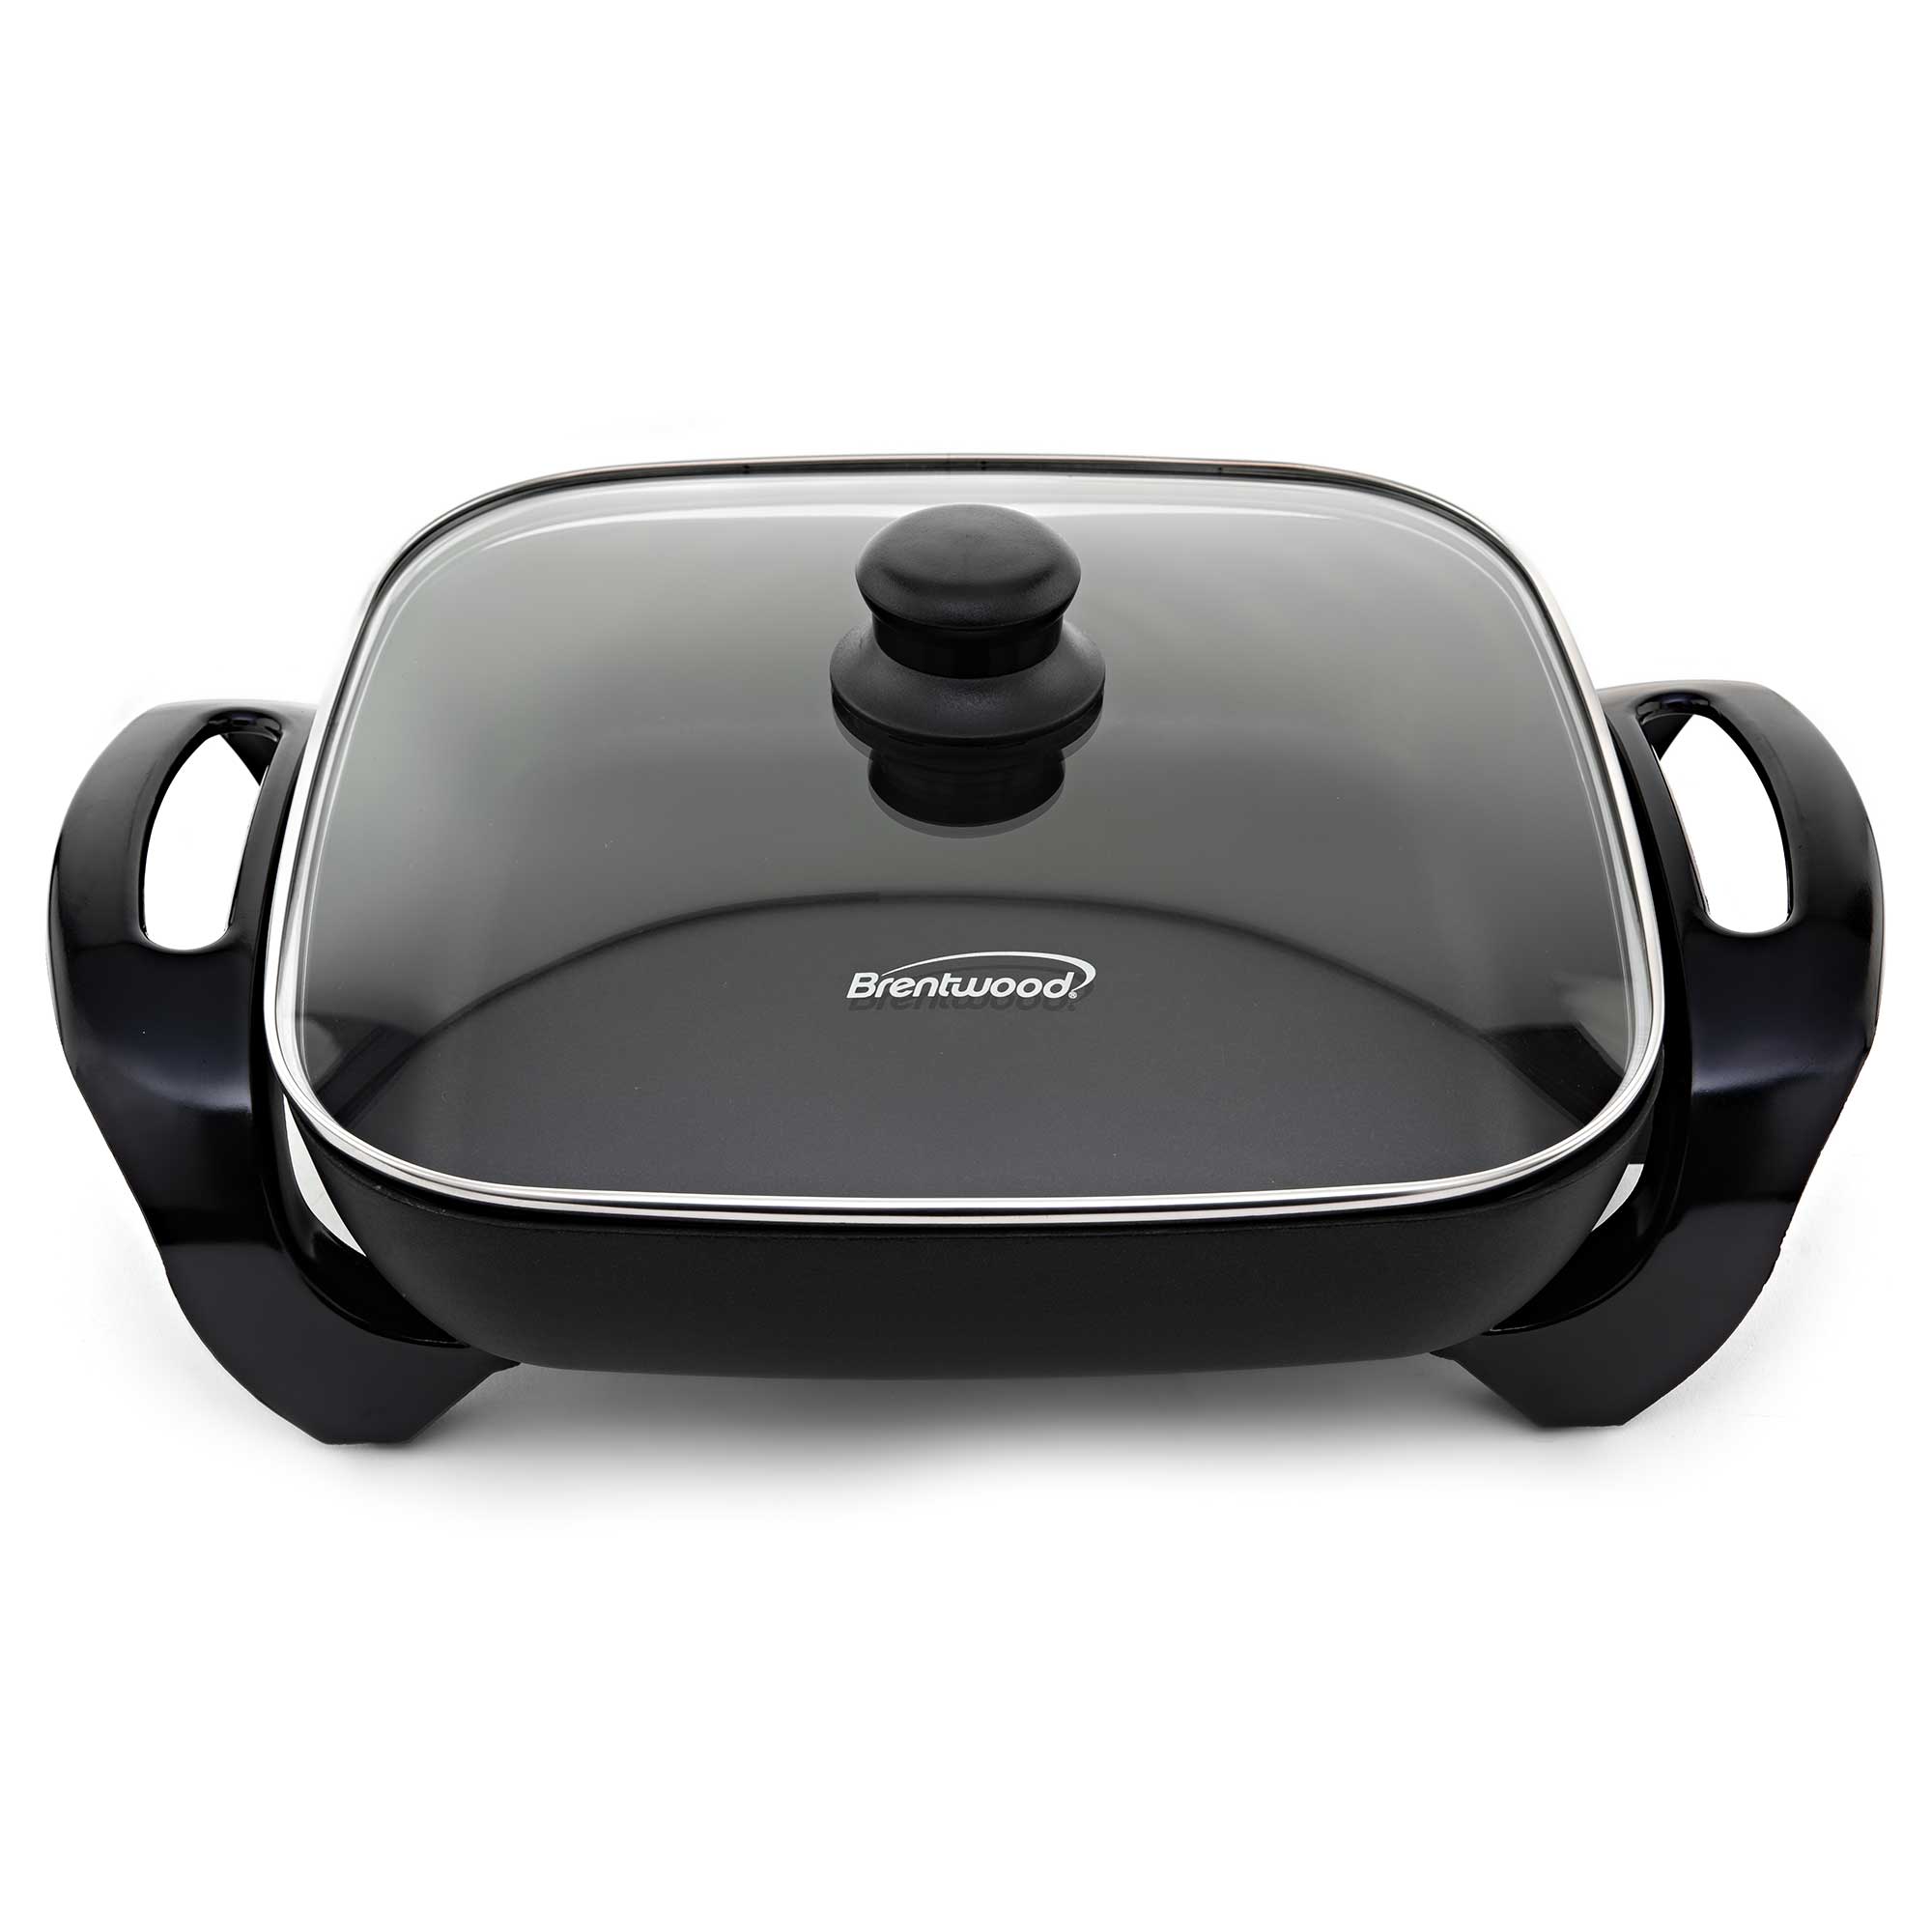 Brentwood SK-69BK 13-Inch Non-Stick Flat Bottom Electric Wok Skillet w -  Brentwood Appliances